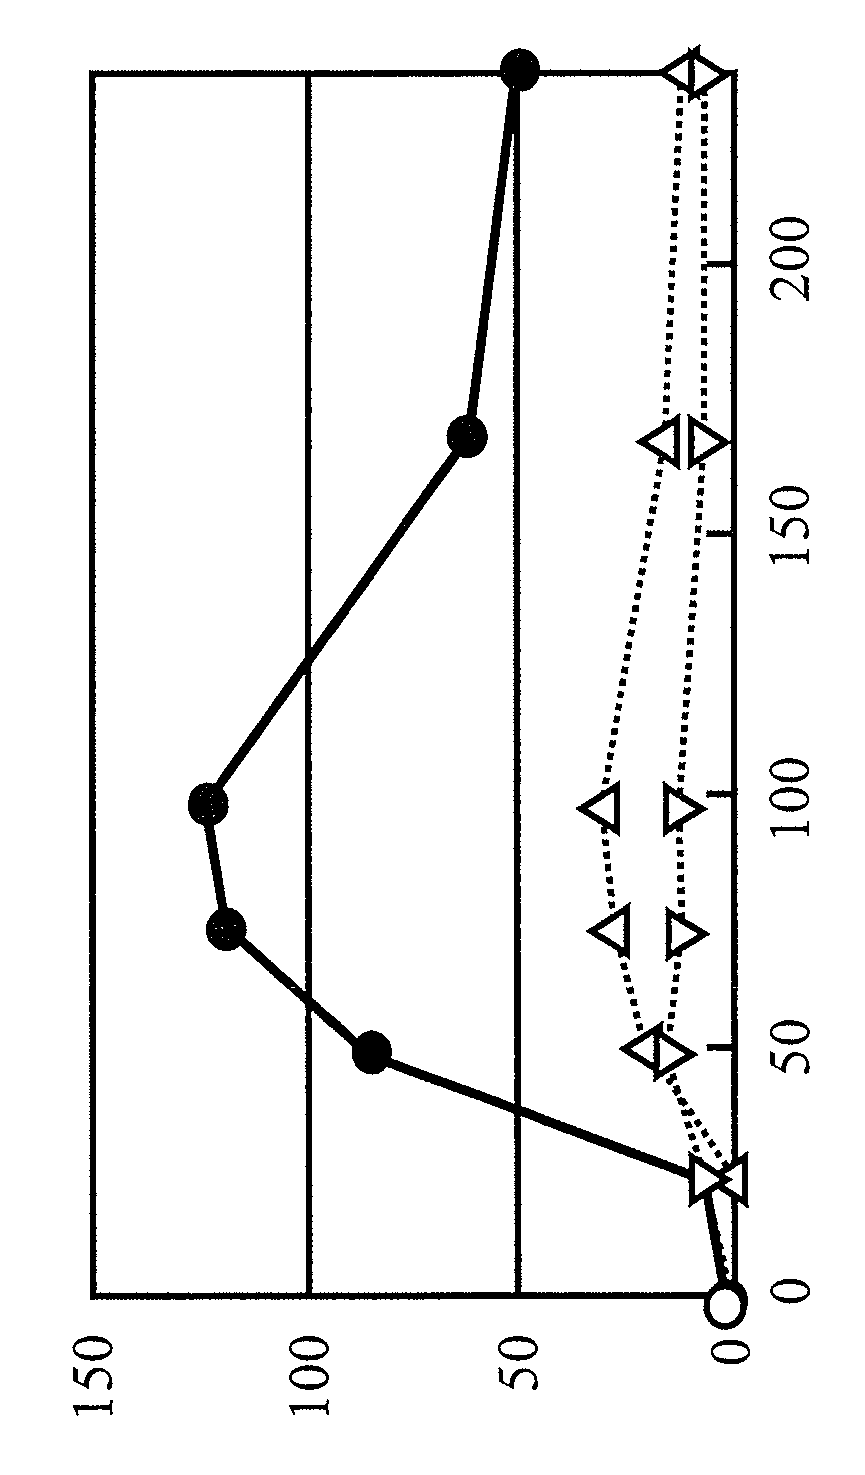 Method for producing isopropanol and recombinant yeast capable of producing isopropanol